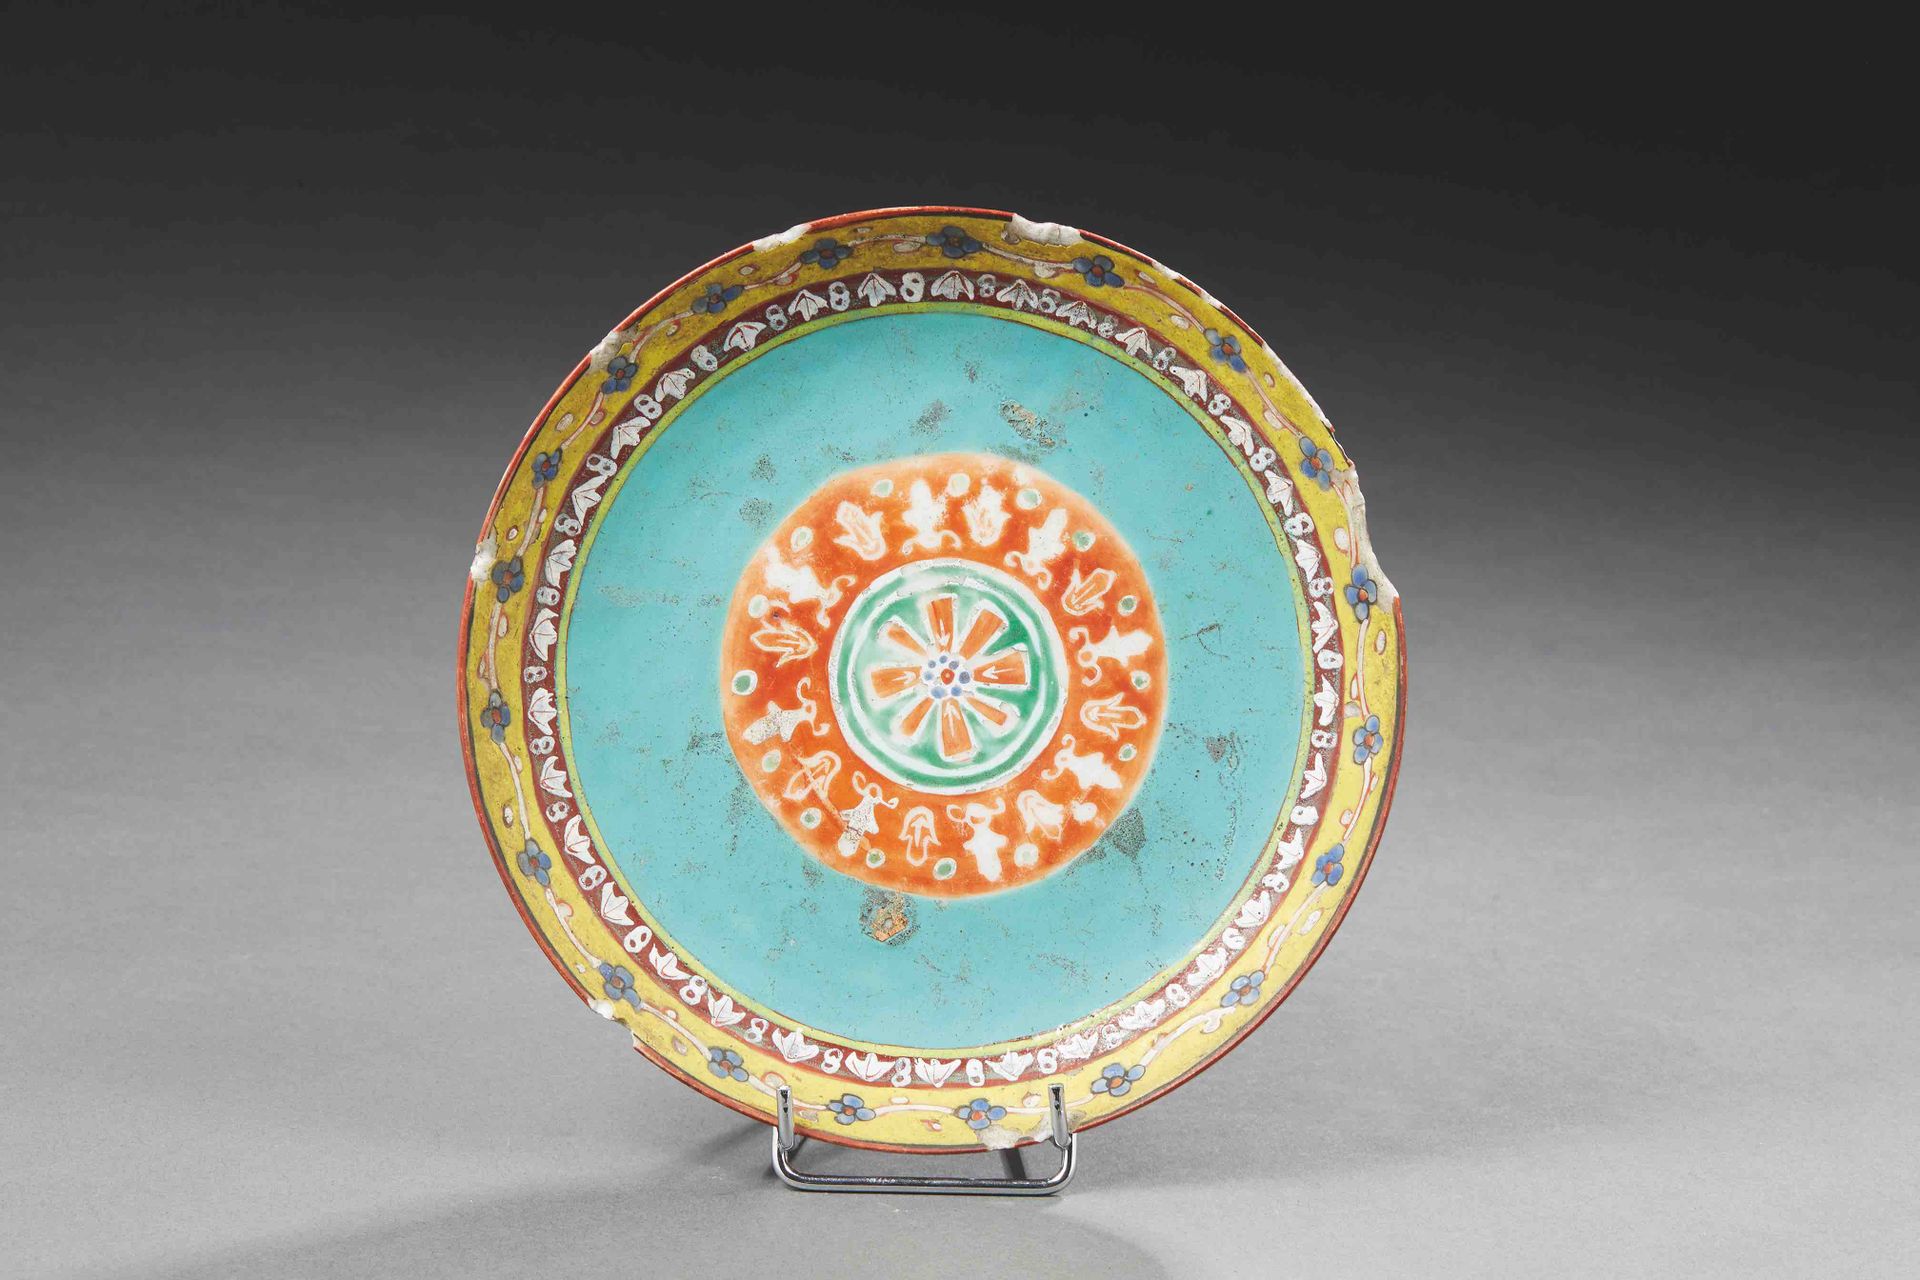 Null CHINA, Bencharong, for Thailand - 19th century


Polychrome enamelled porce&hellip;